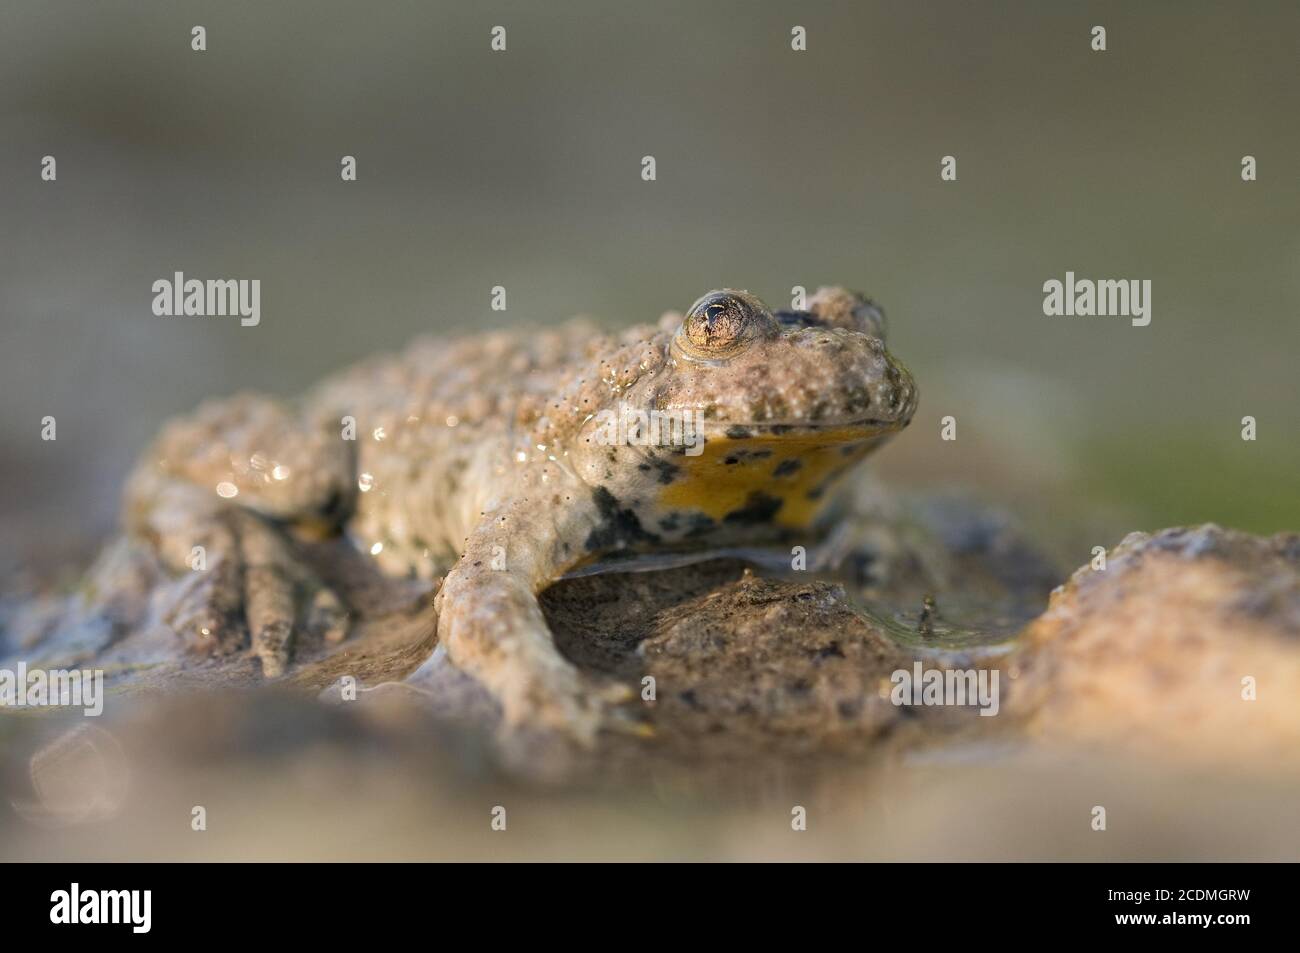 Yellow-bellied toad (Bombina variegata) sitting on the edge of a pond, Bavaria, Germany Stock Photo